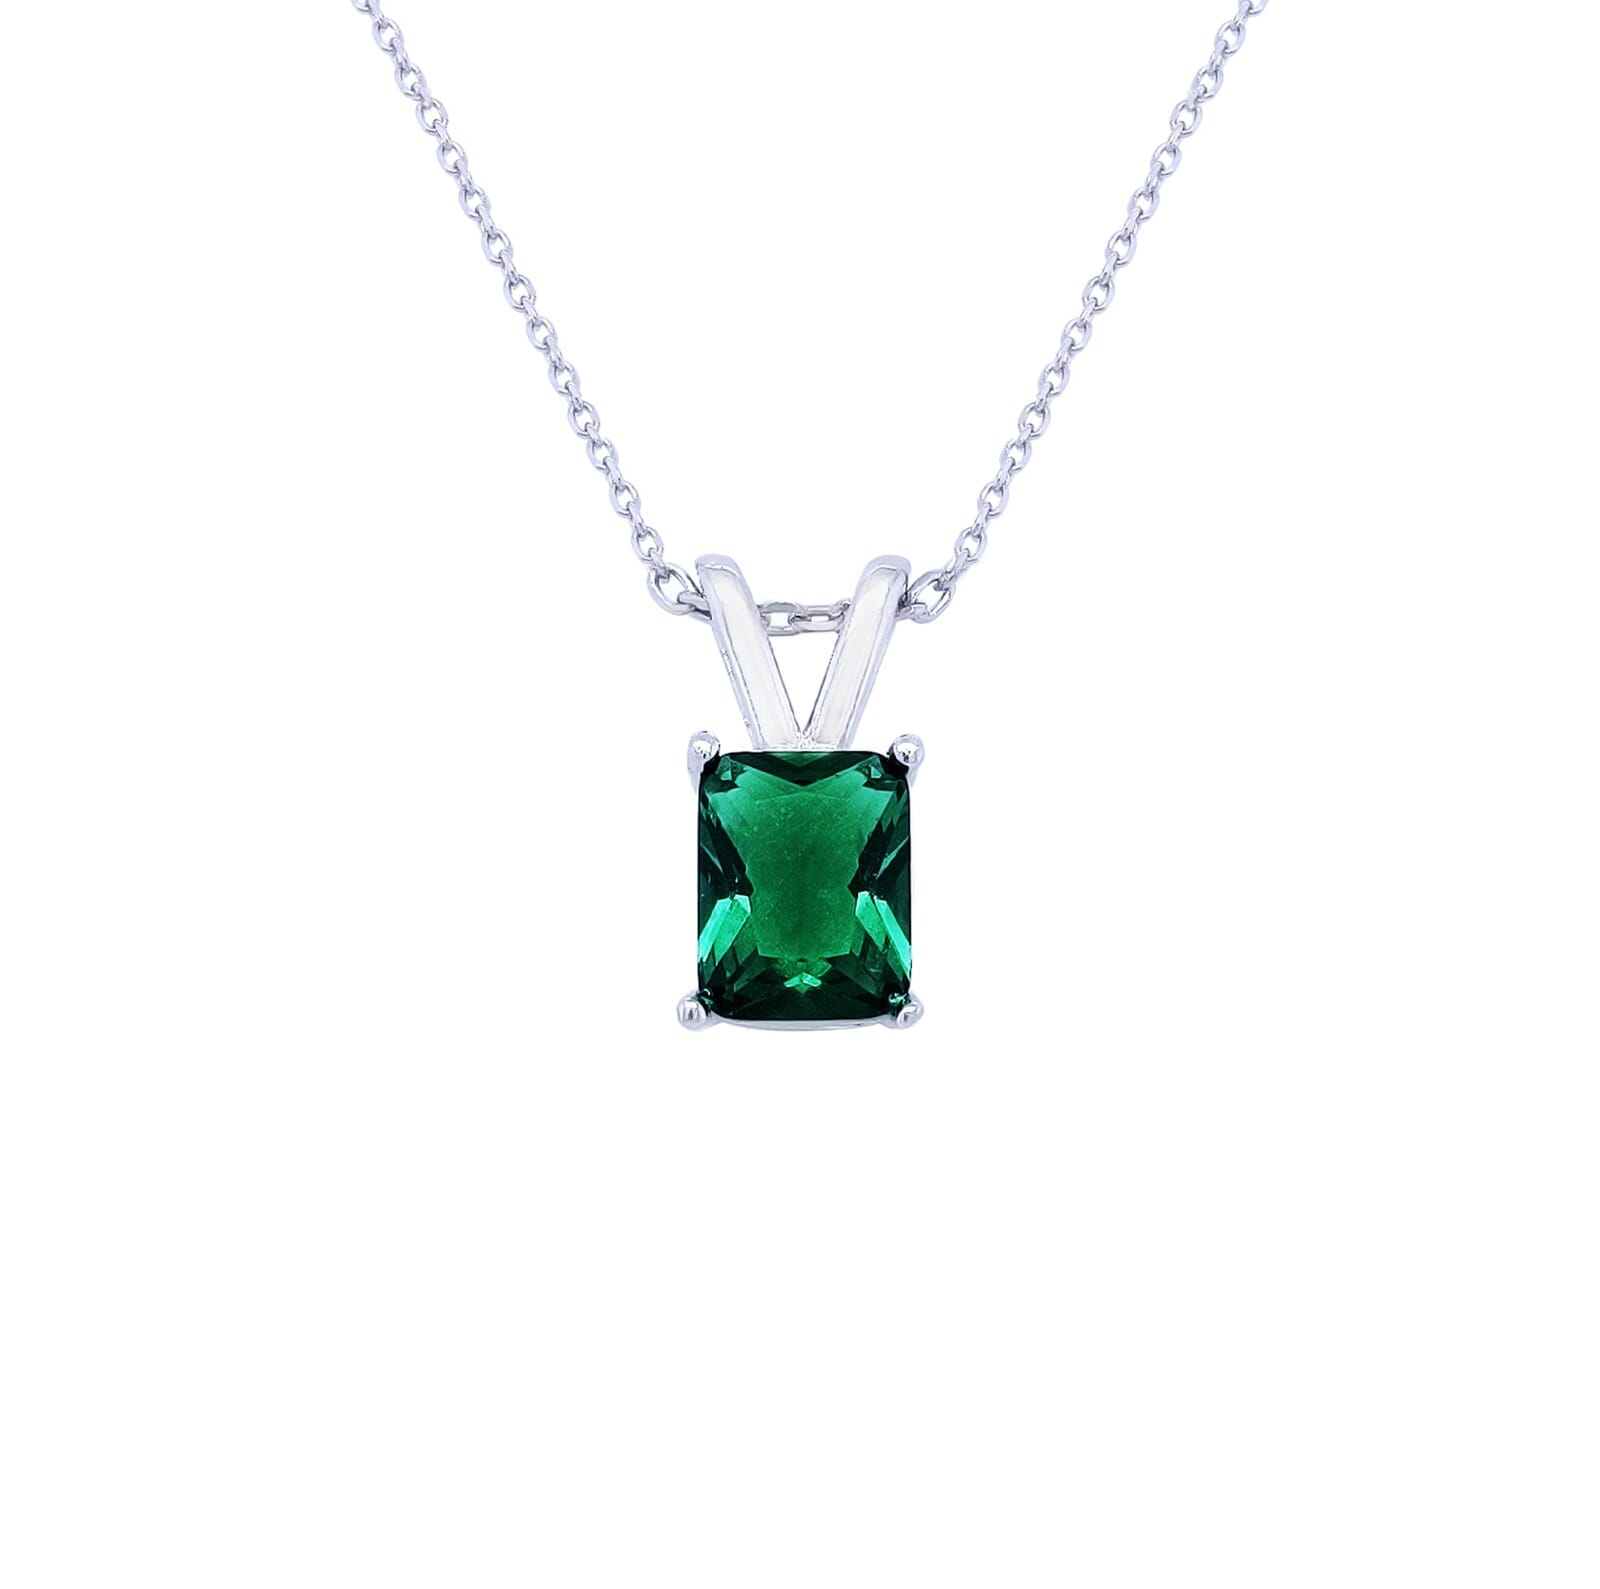 Asfour 925 Sterling Silver Necklace With Green Emerald Cut Pendant